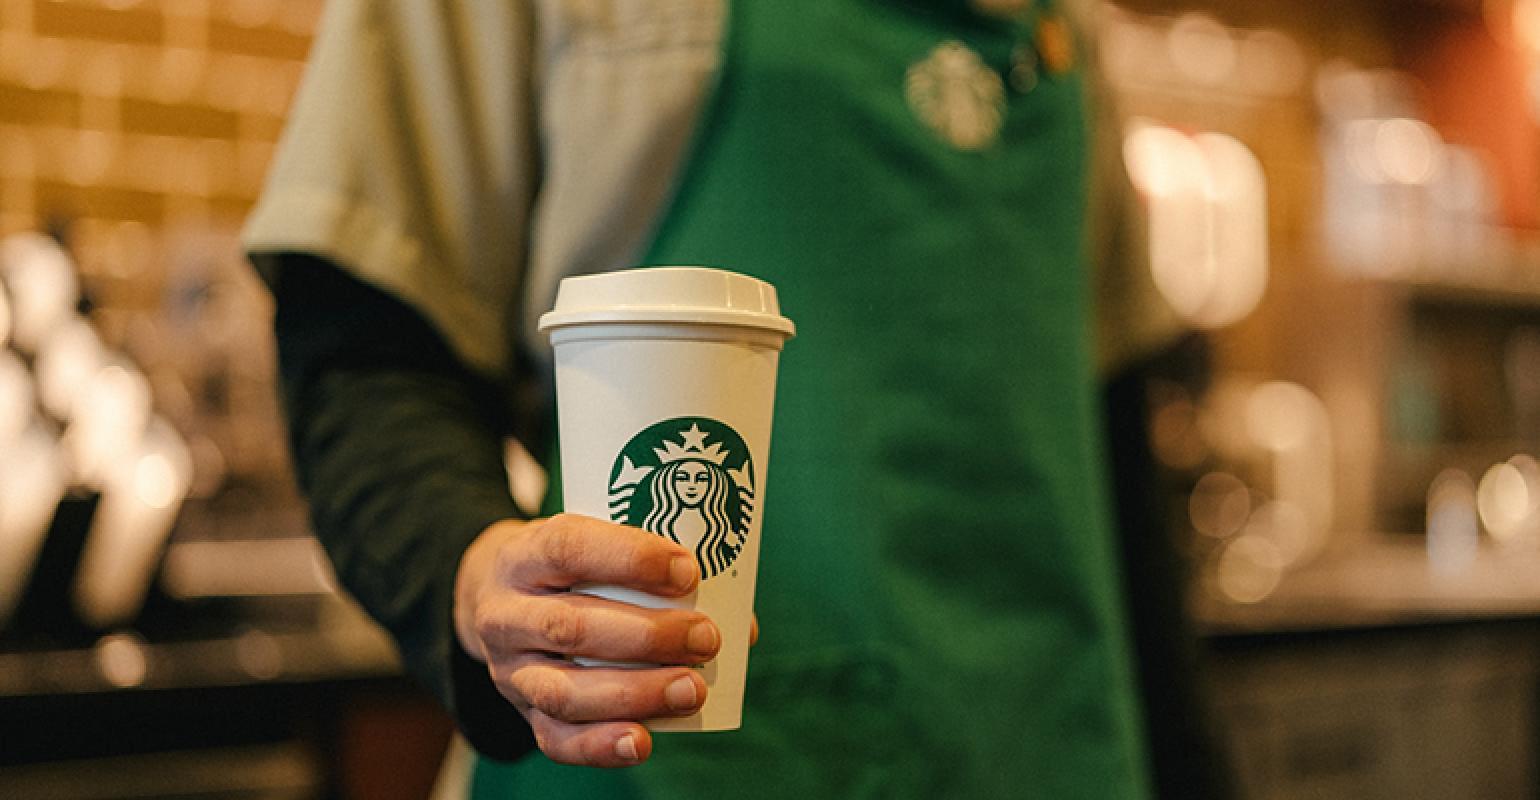 Oatly enters Starbucks cafes nationwide as it prepares for a big year